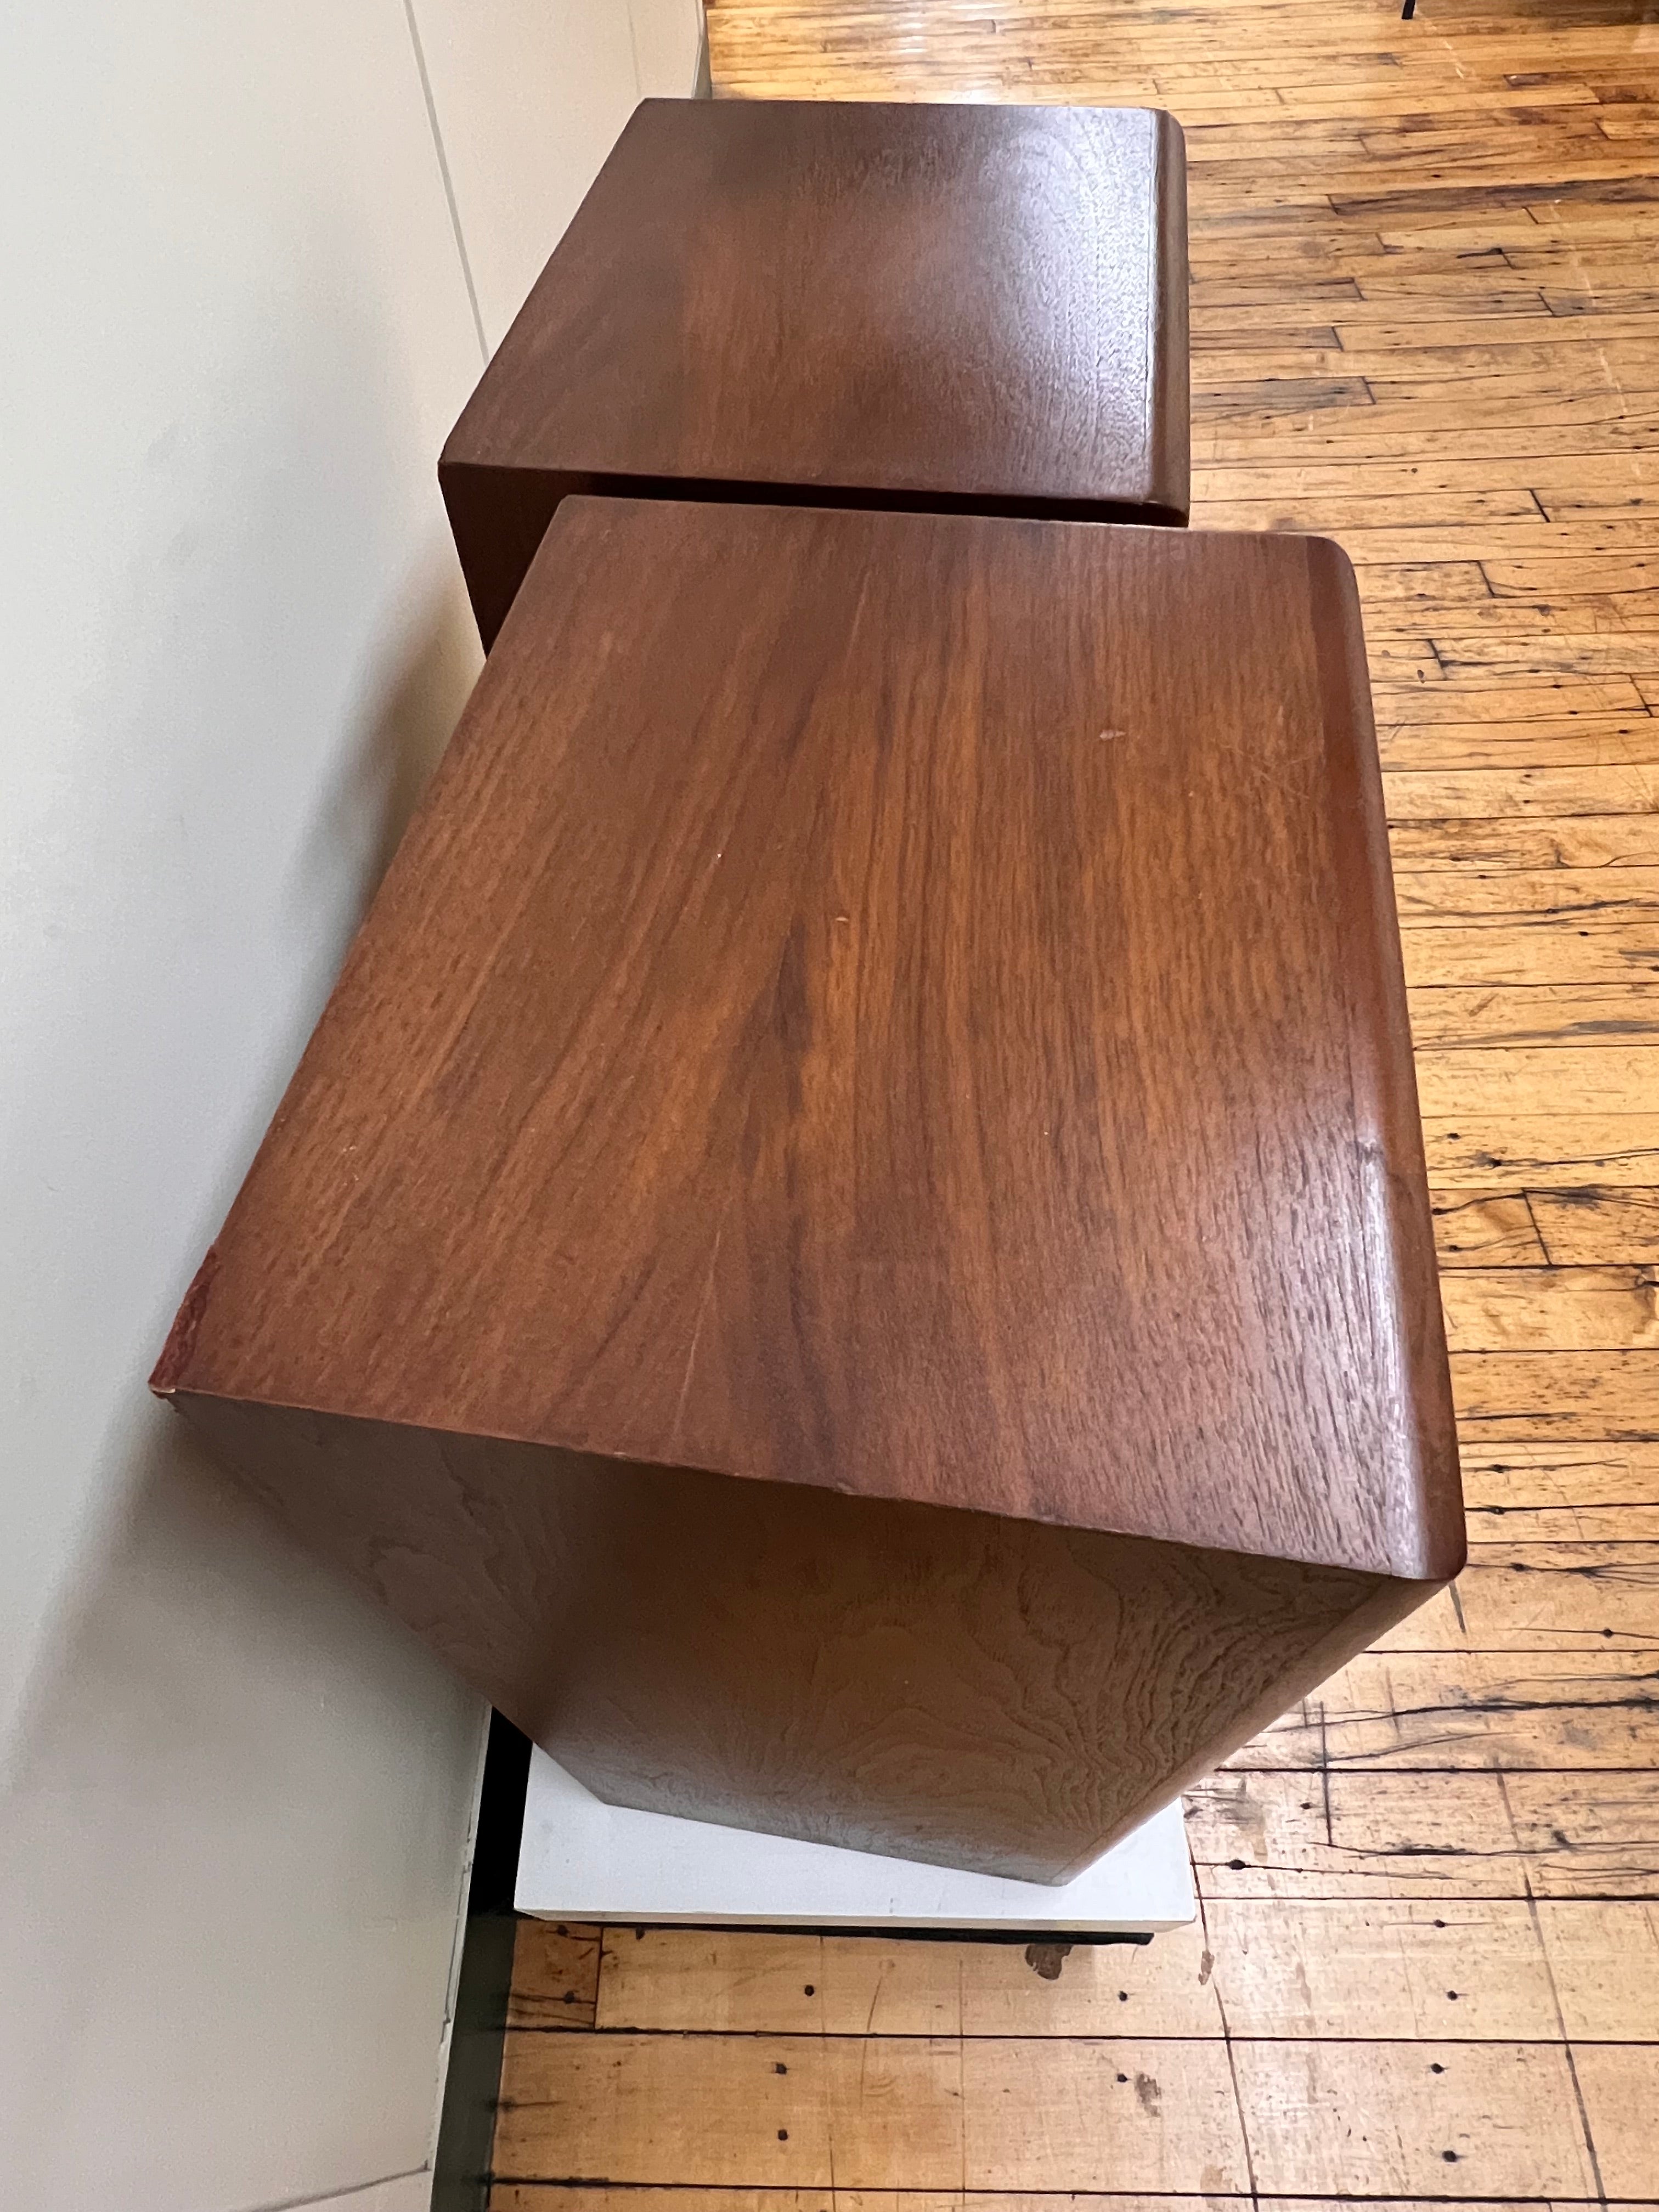 The "New" Advent Loudspeaker, Bullnose Cabinets, Real Walnut